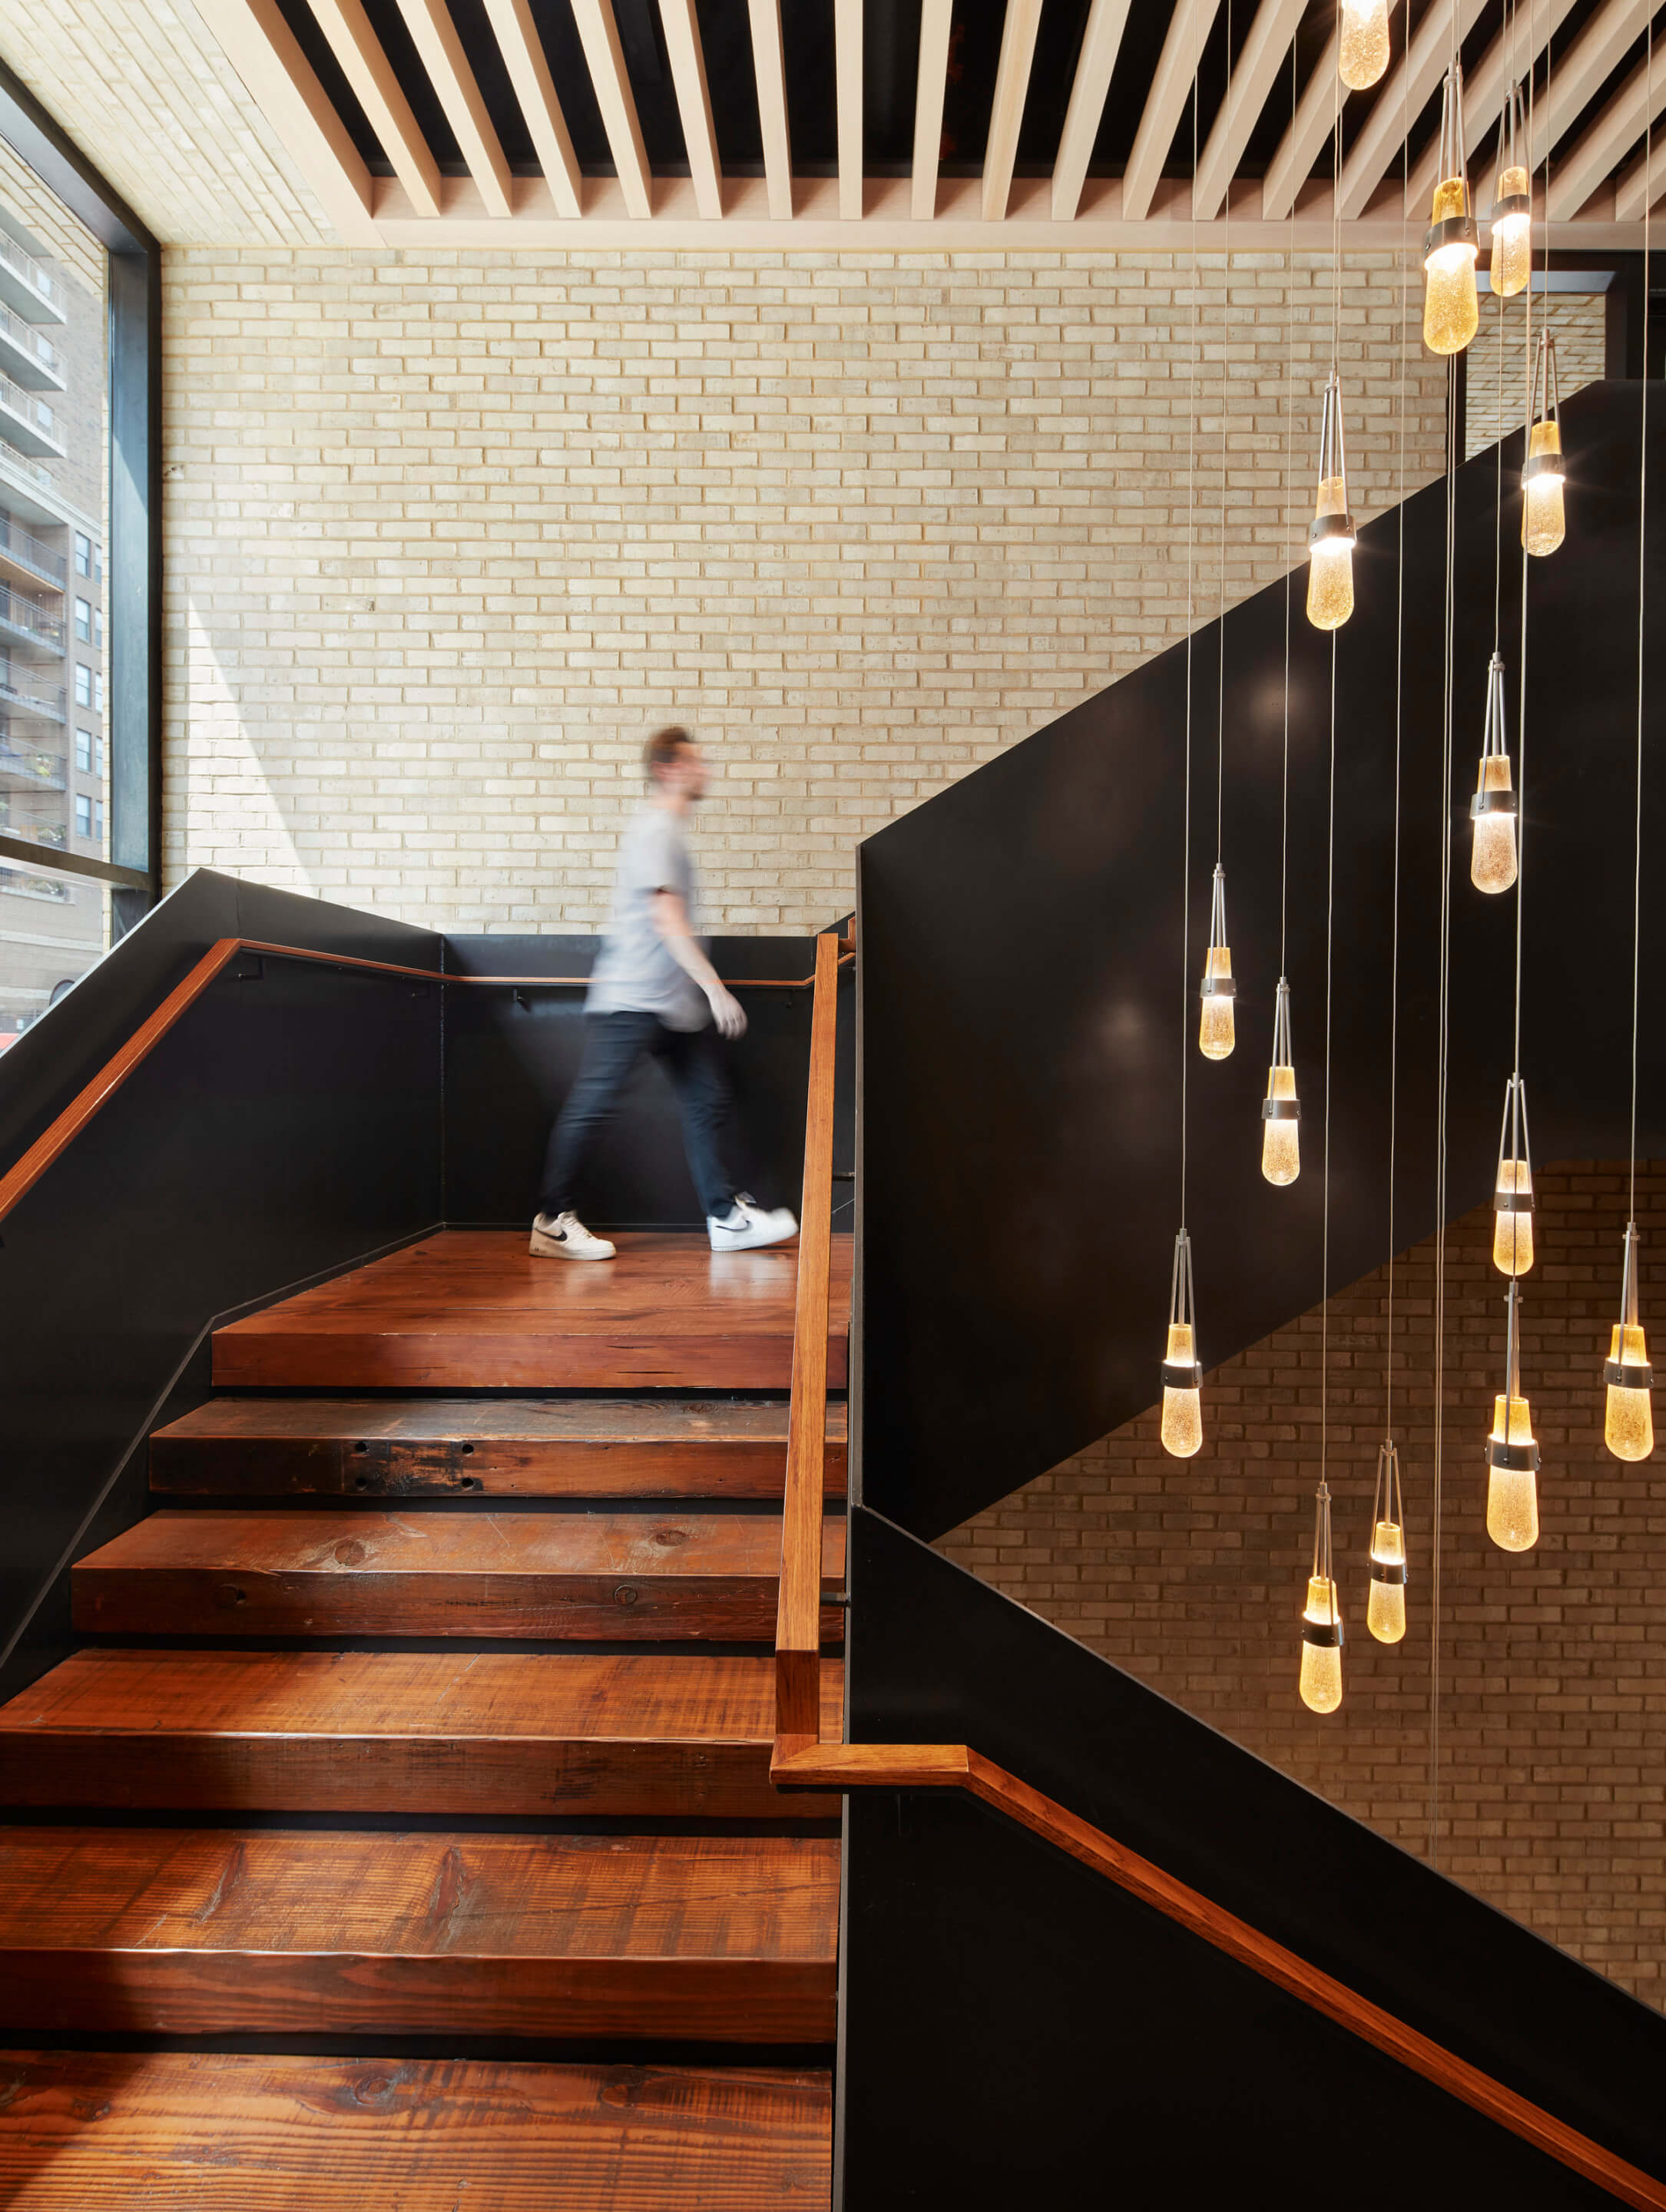 A staircase with pendant lights